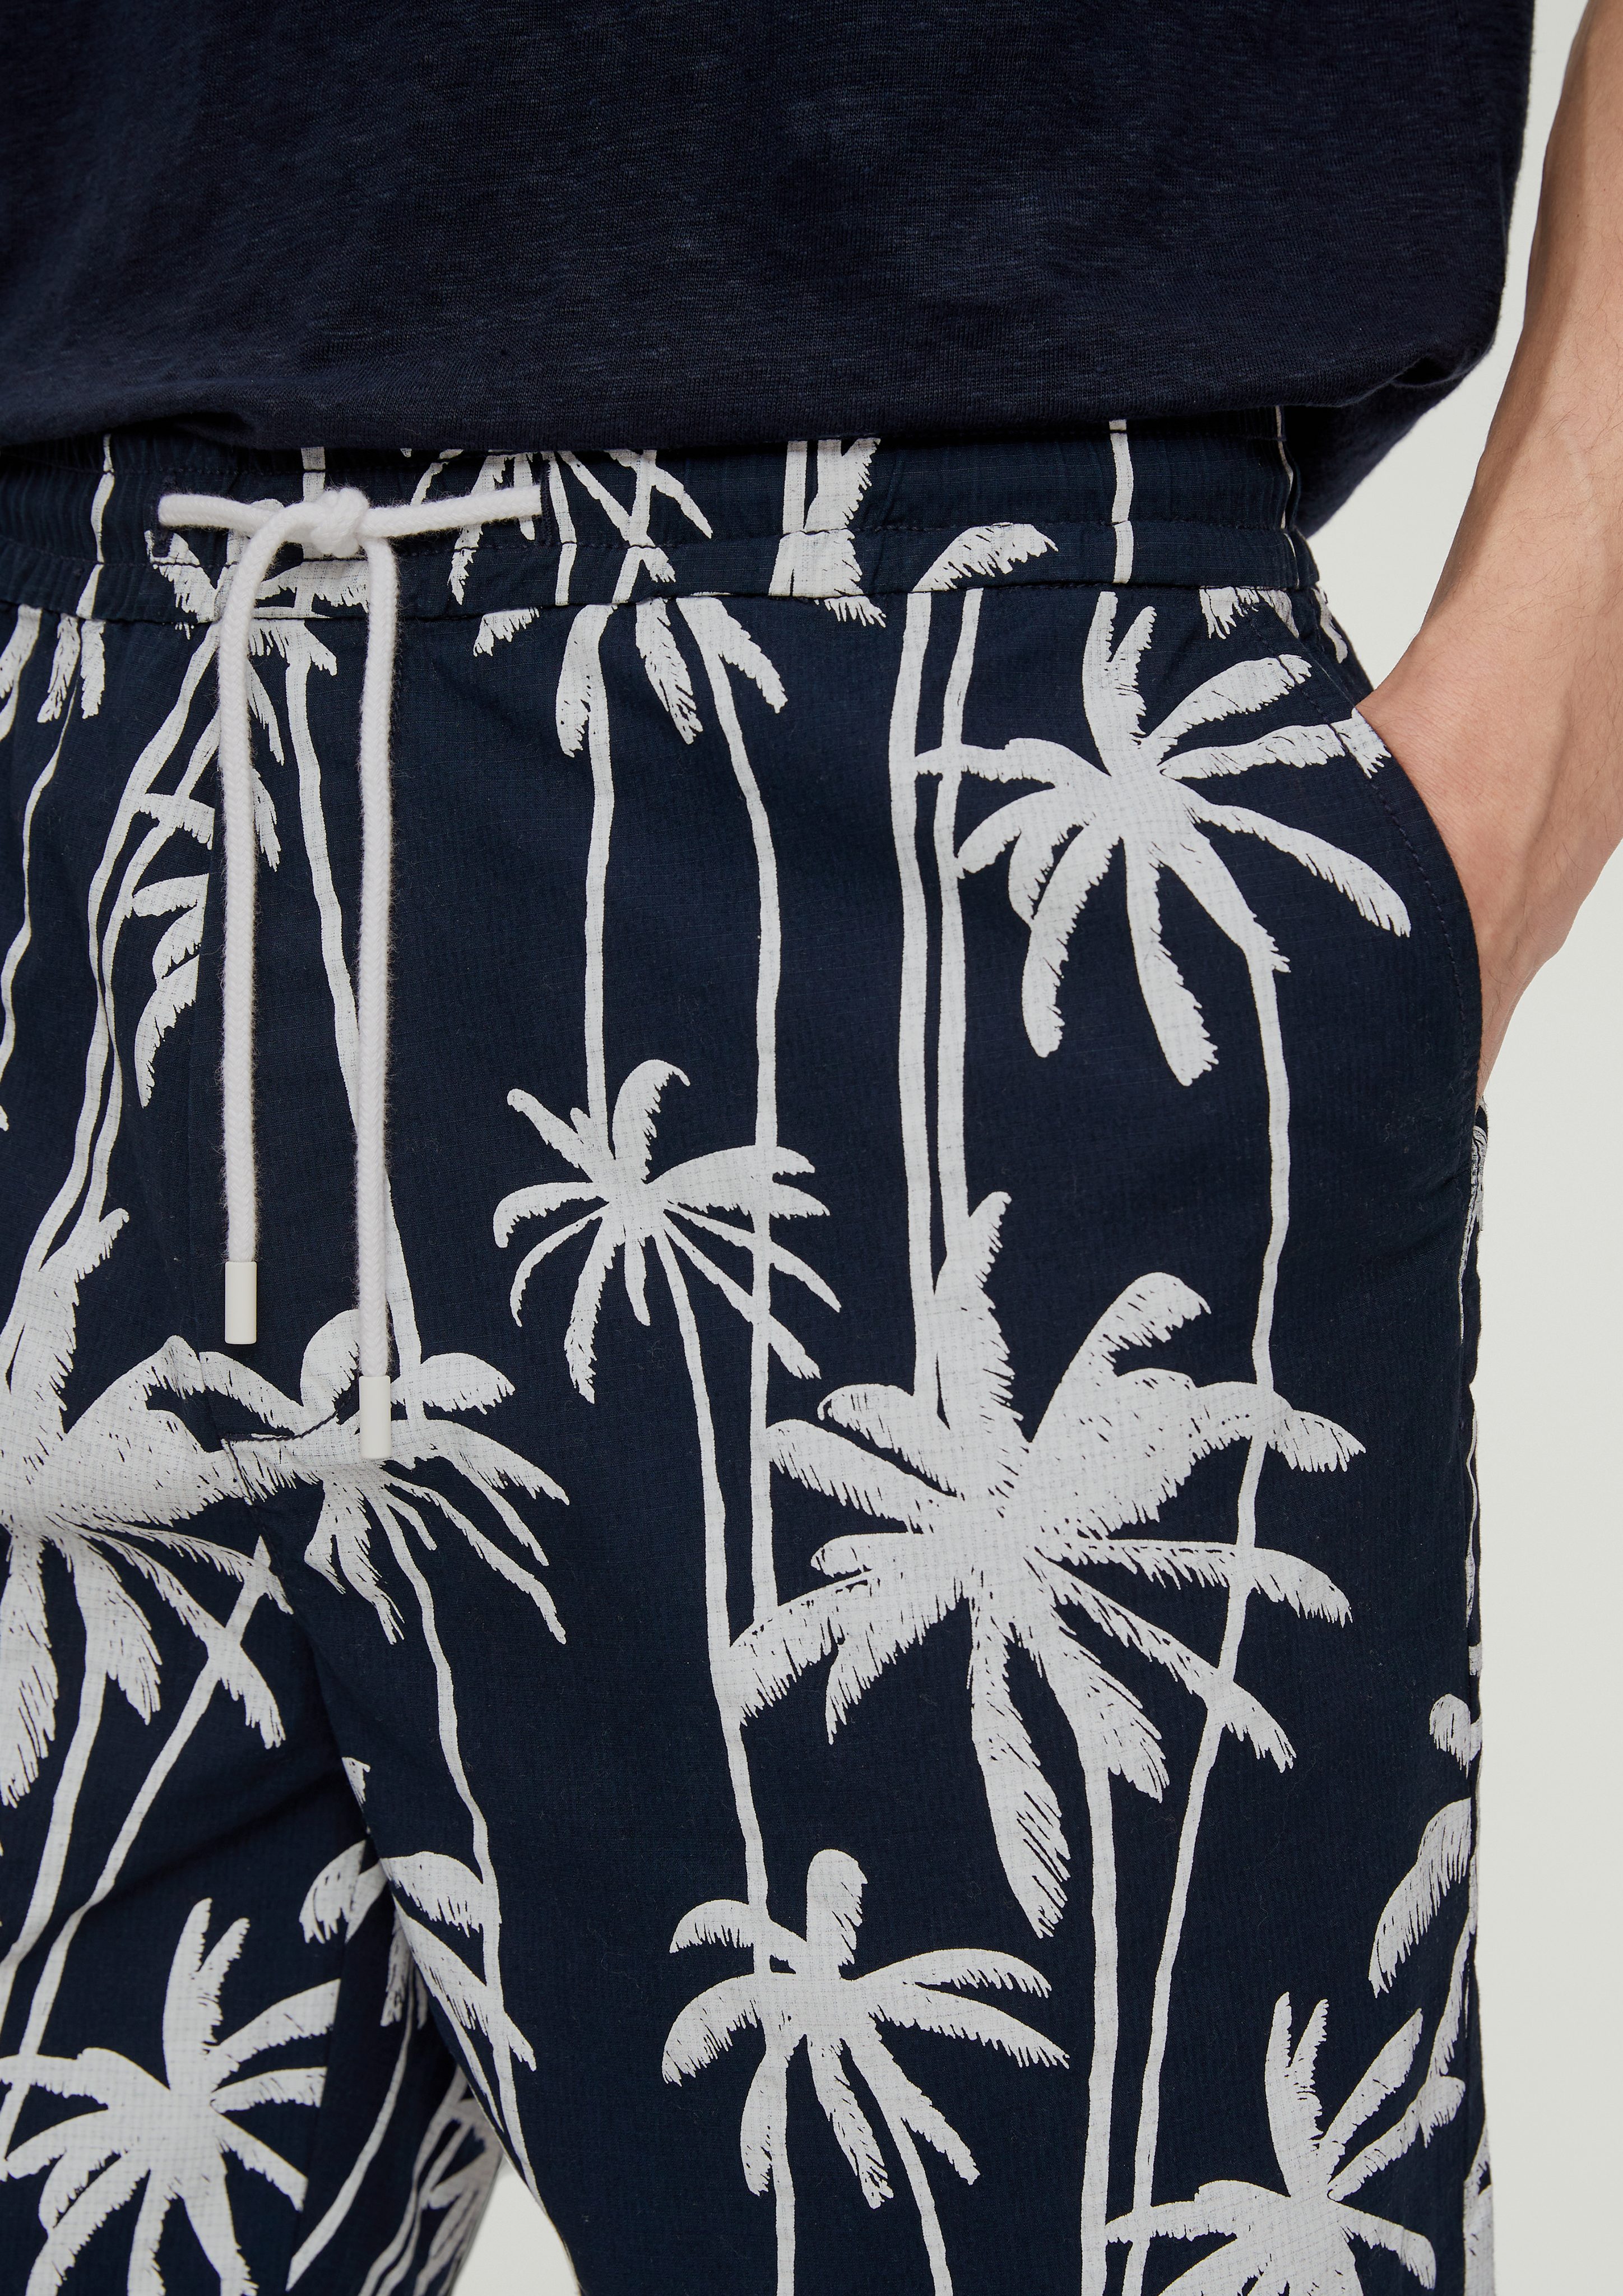 mit Jogger s.Oliver Relaxed: All-over-Print Bermudas navy Durchzugkordel